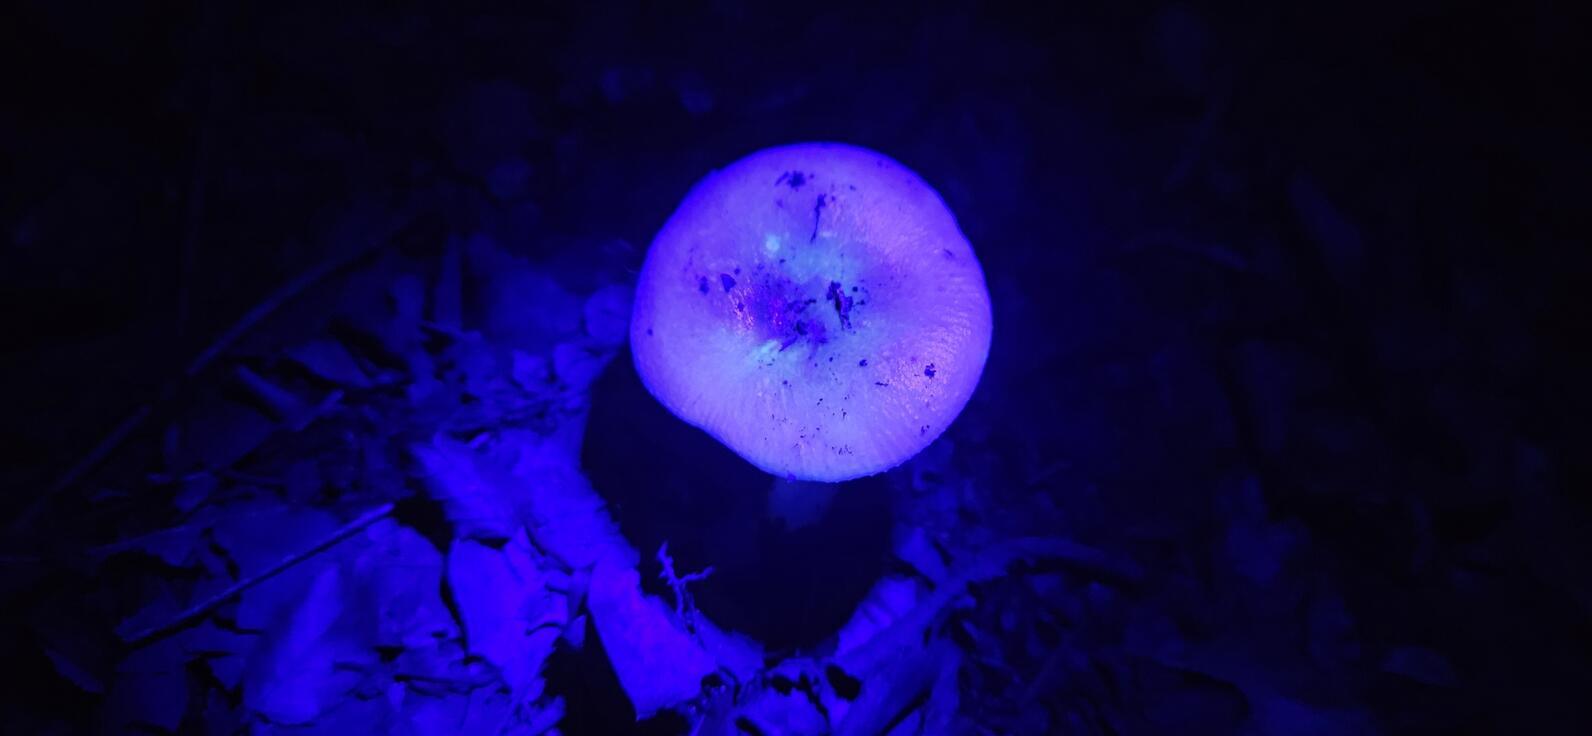 A round mushroom rises from the leaves, normally it's a pale off white color, but with ultraviolet light it appears as an intense purple with green glowing from within.